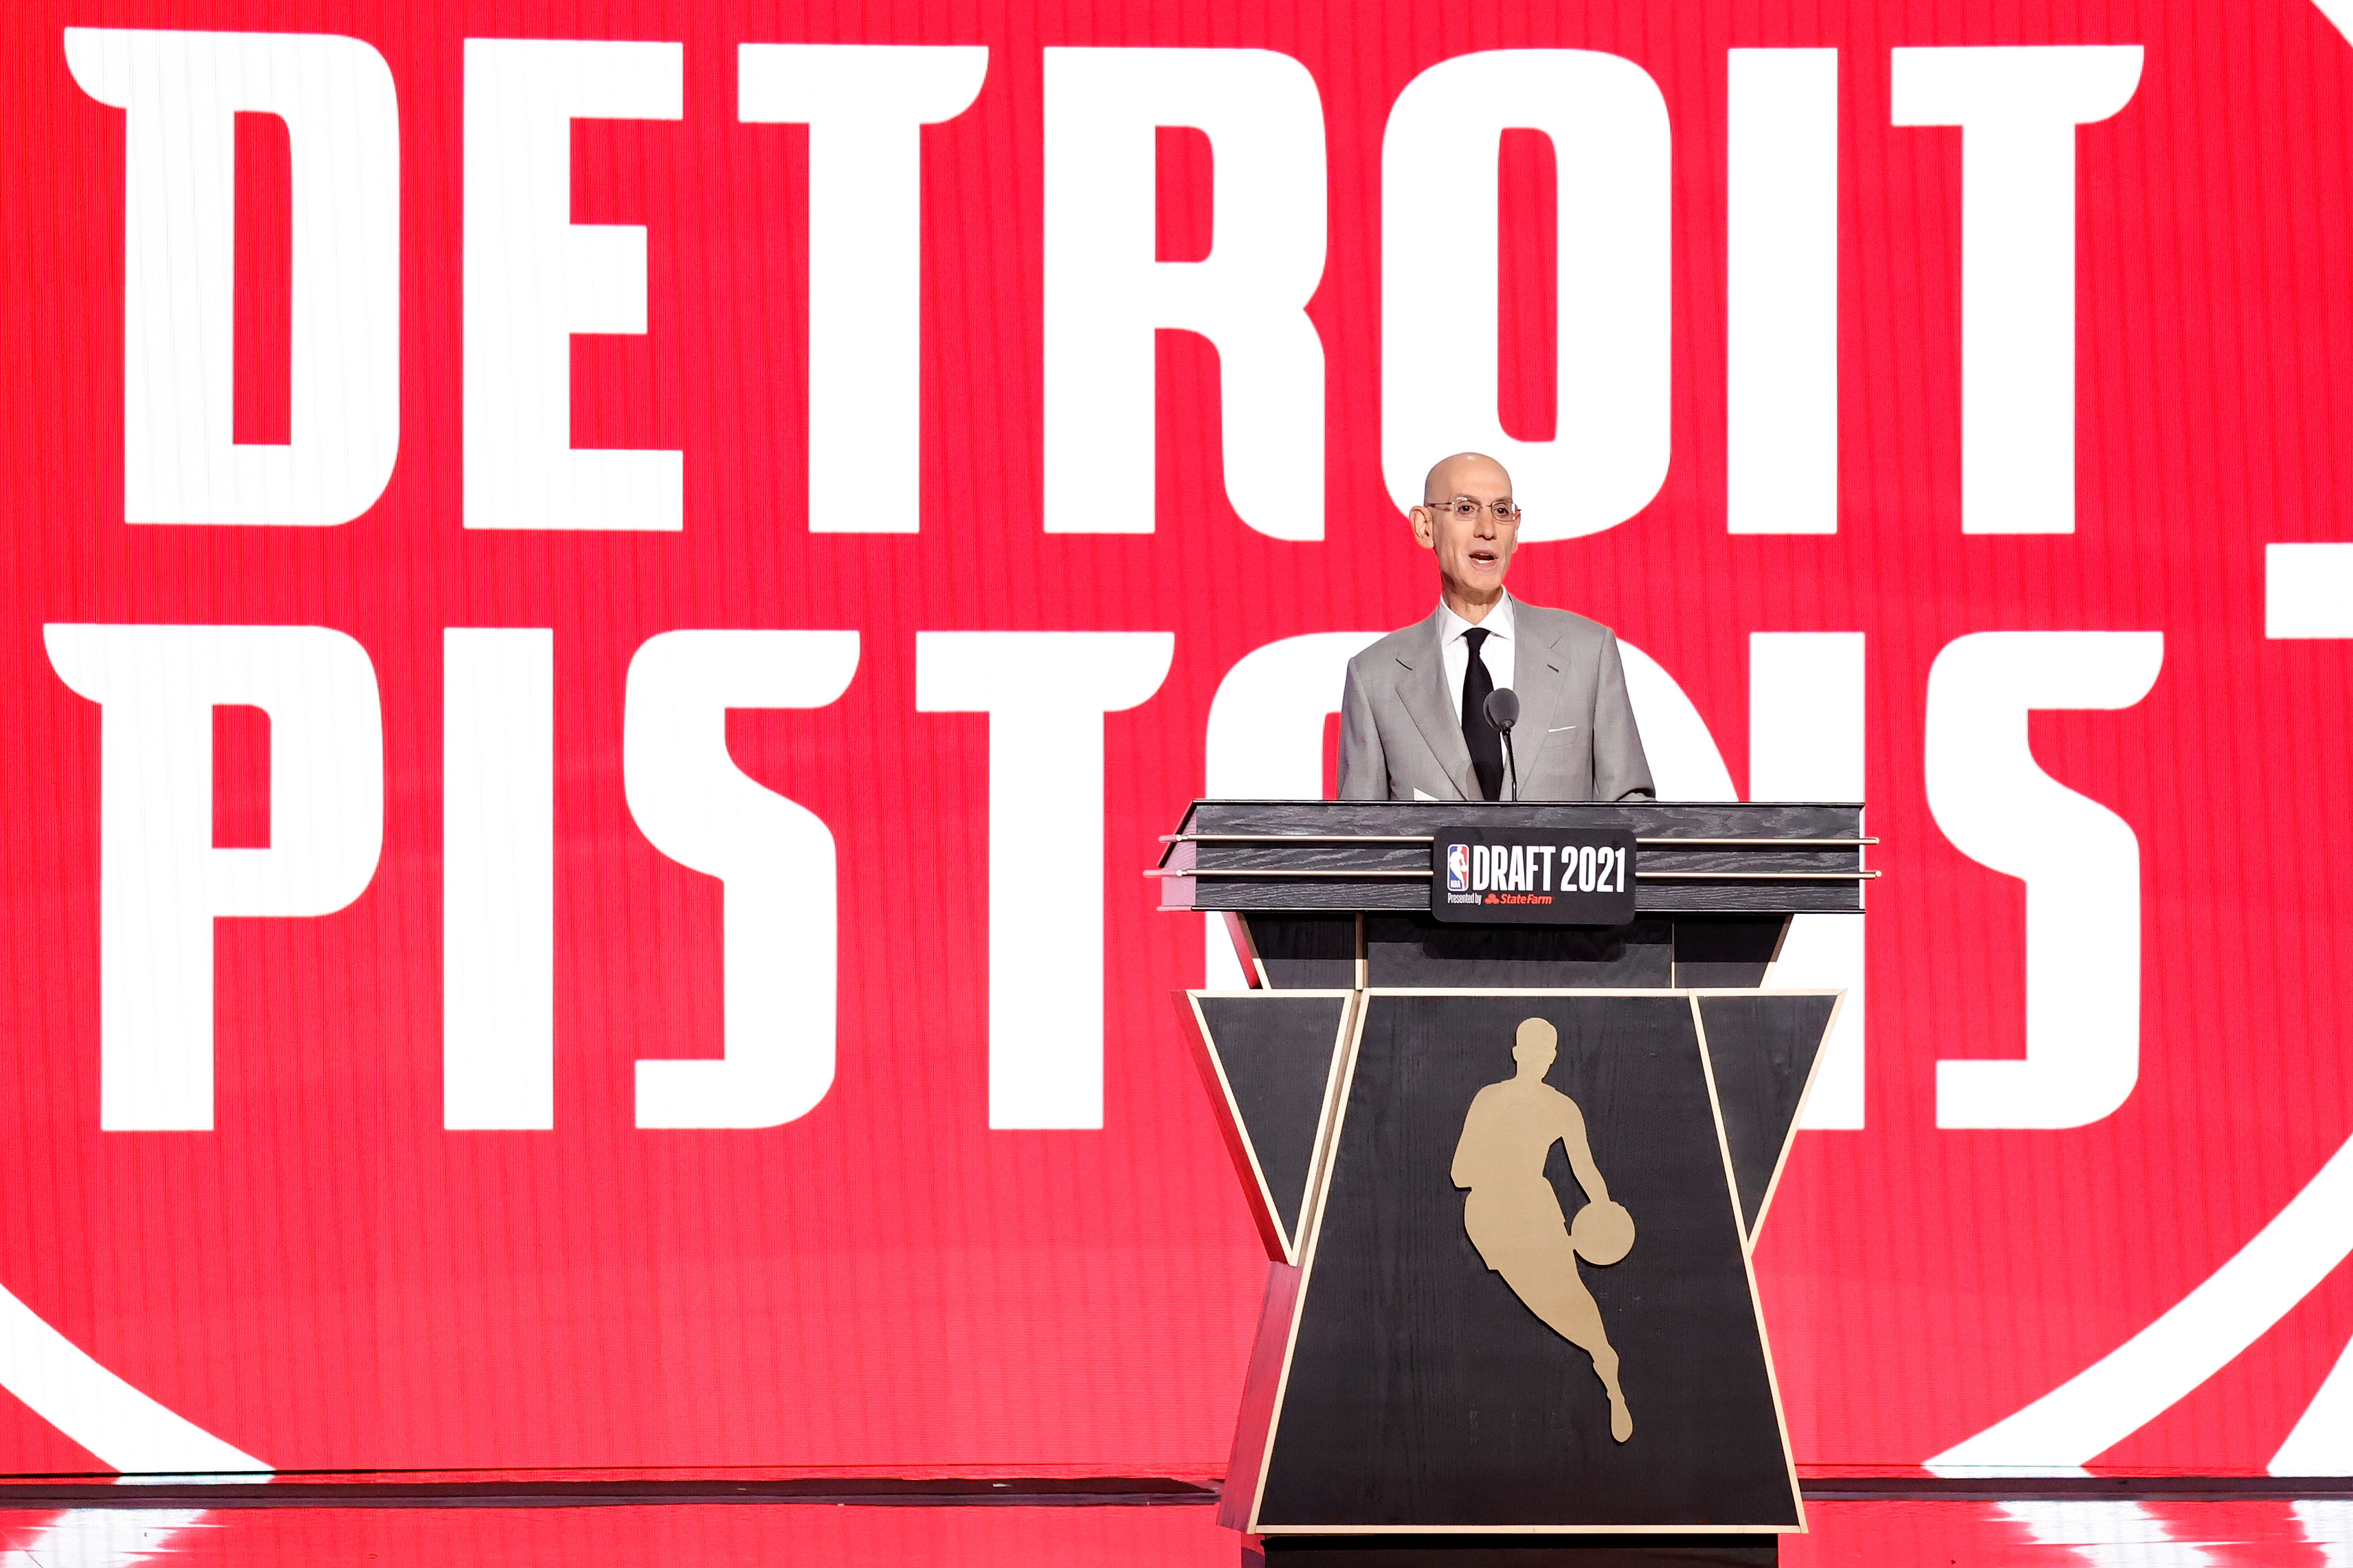 NBA Draft Lottery: Pistons not as lucky this time, slide to 5th spot